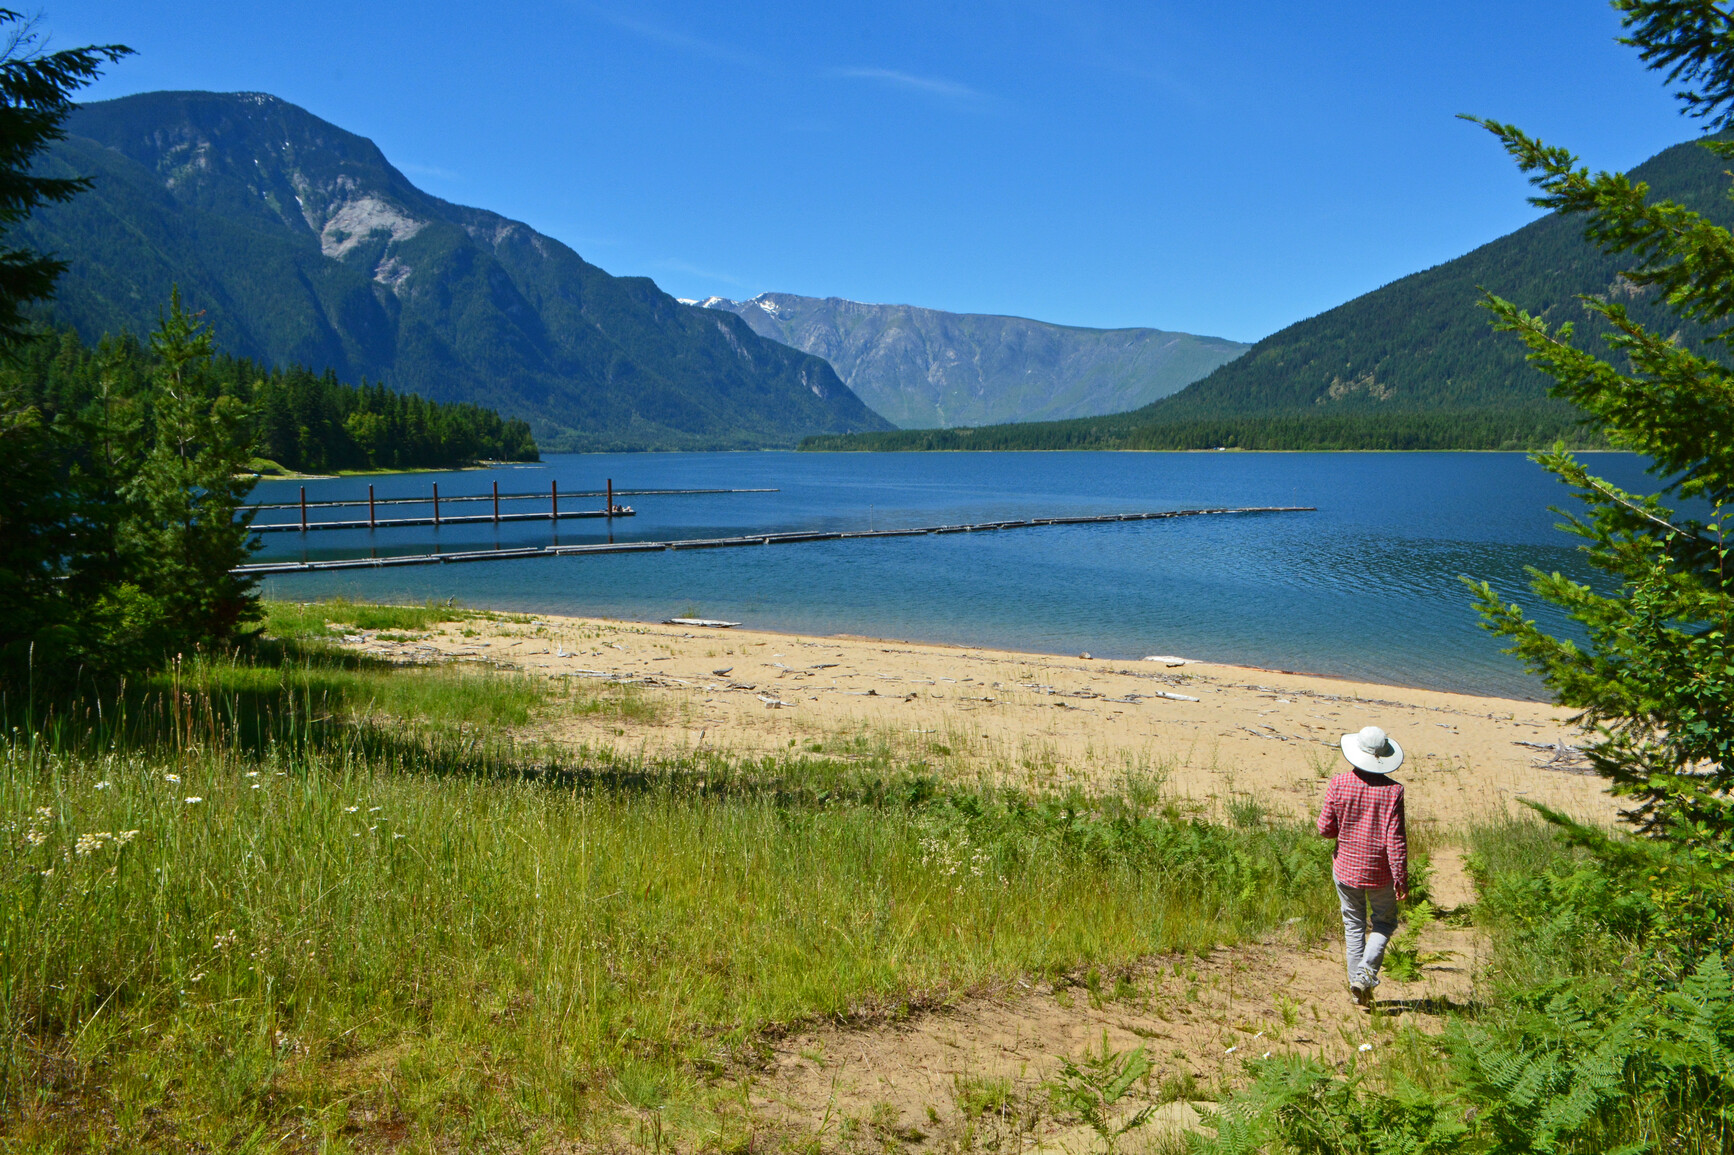 McDonald Creek Park, Upper Arrow Lake - A park visitor walking on a path towards a sandy beach at Arrow lake. Grasses and trees are in the foreground. The lake, trees, forests and mountains are in the background.